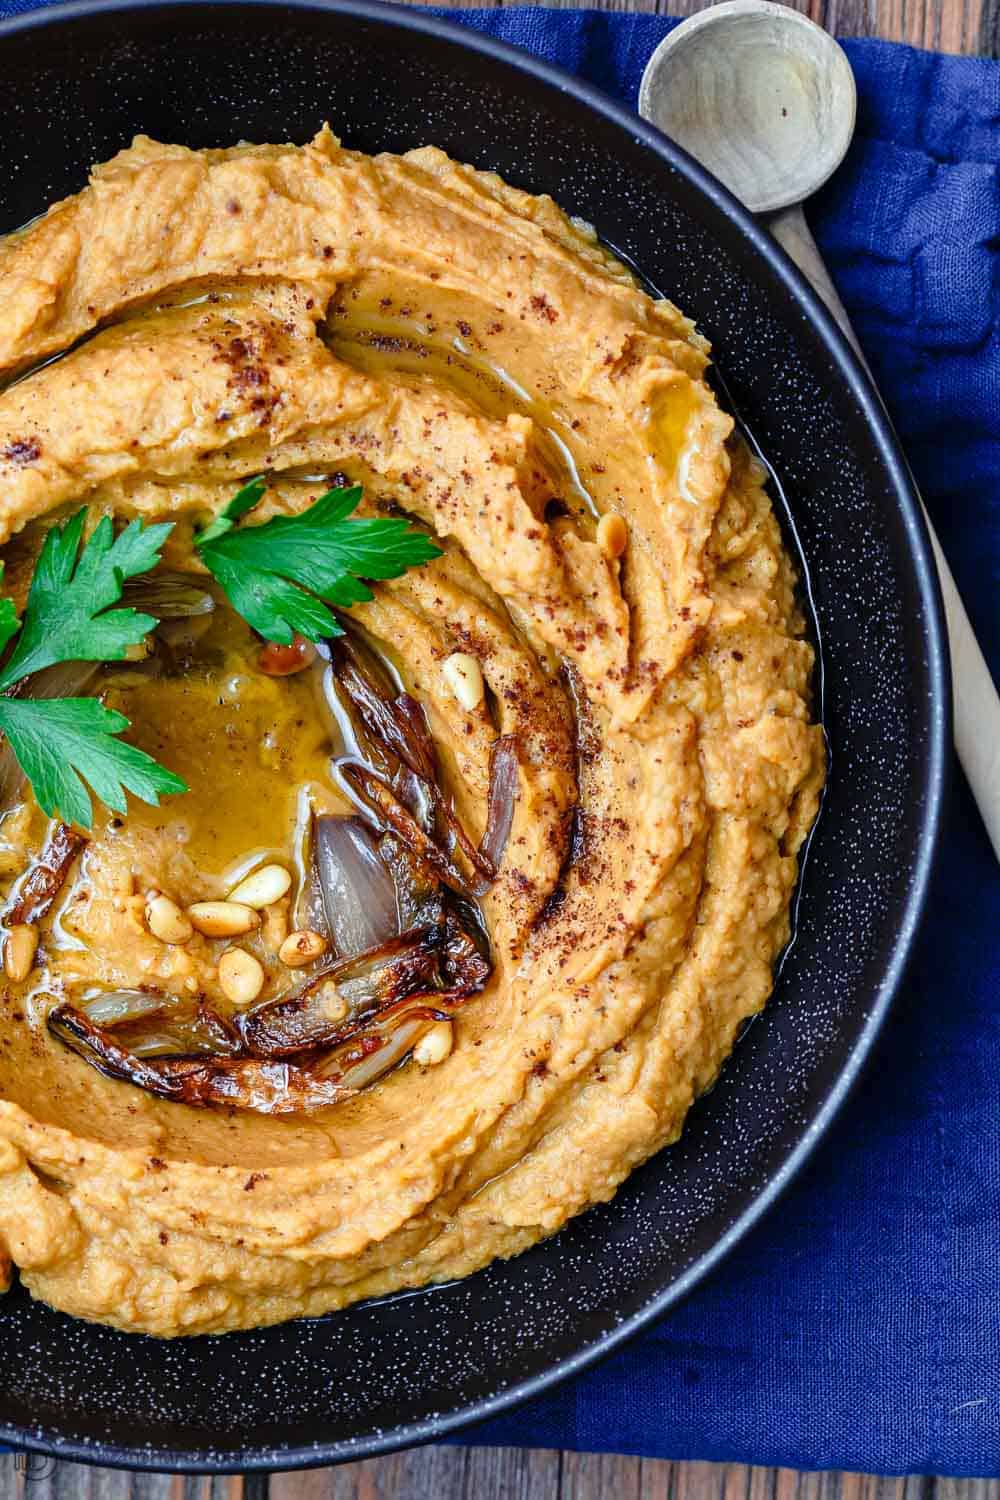 Bean Dip with Roasted Acorn Squash | The Mediterranean Dish. A rustic, flavor-packed white bean dip with a Mediterranean twist. I add caramelized shallots, warm Mediterranean spices, and toasted nuts! See the easy recipe on TheMediterraneanDish.com #beandip #whitebeandip #dip #appetizer #partyfood #holidayrecipe #squash #roastedsquash #hummus #mediterraneanrecipe #mediterraneandiet #mediterraneanfood